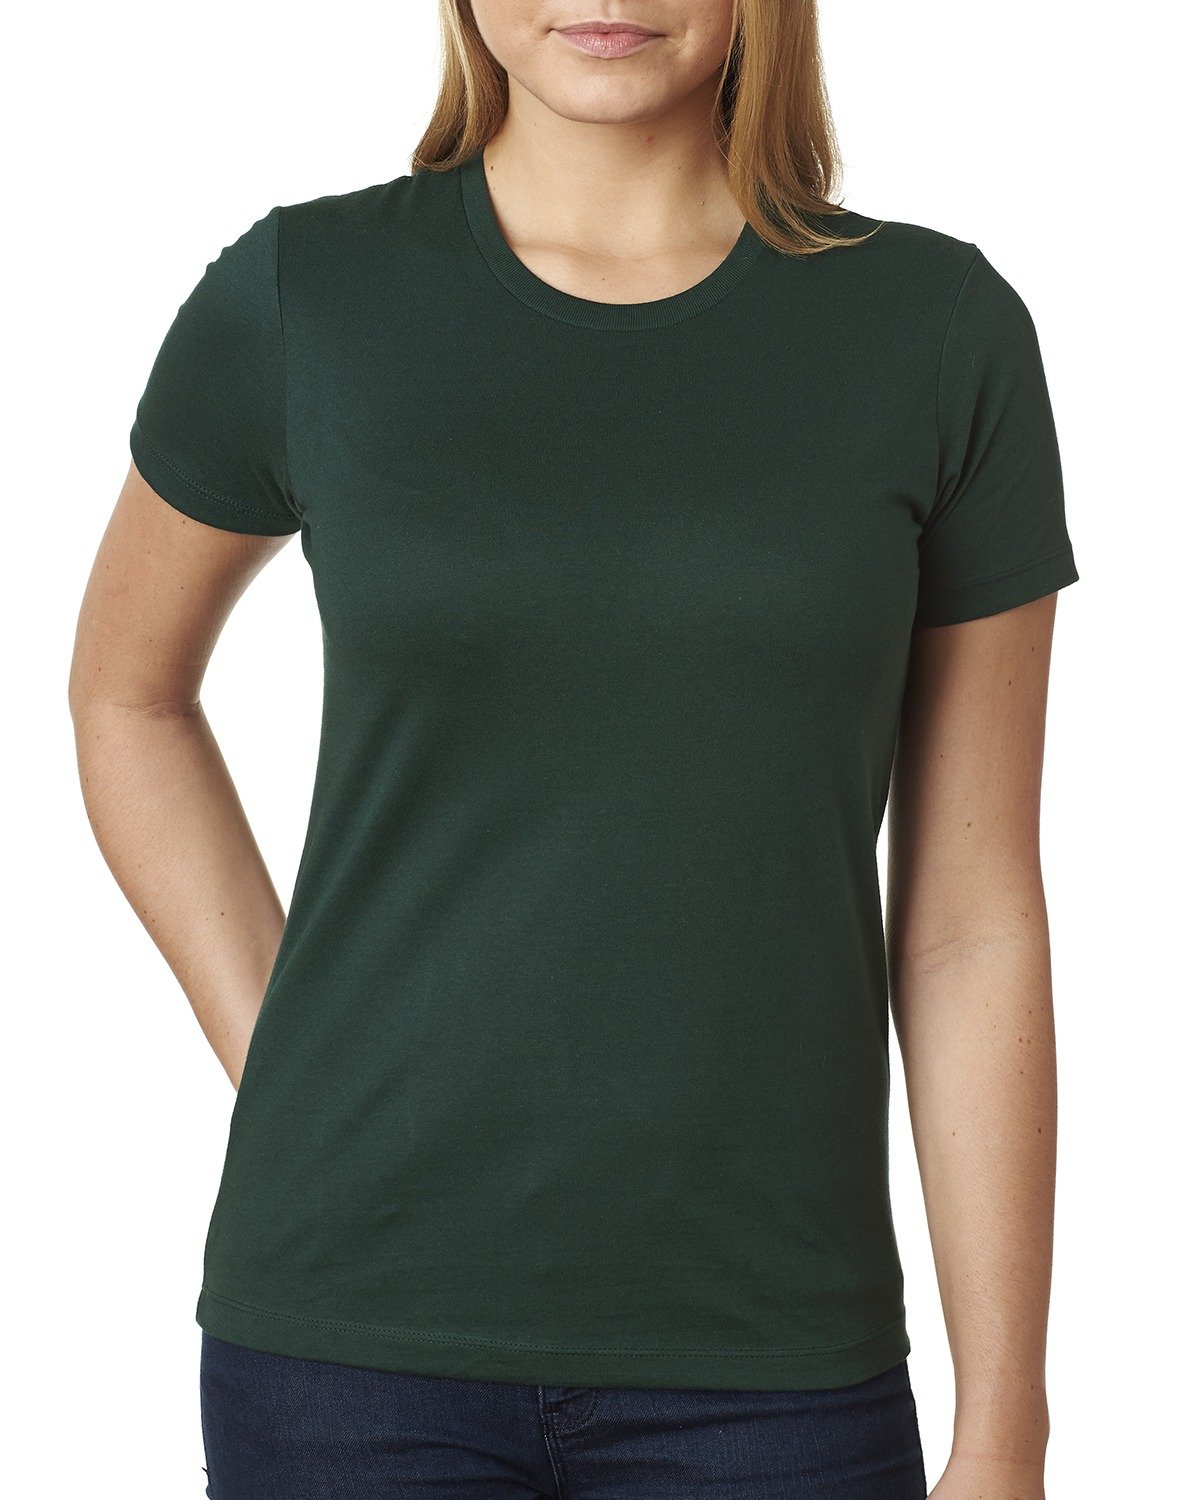 Next Level Apparel Ladies' T-Shirt FOREST GREEN 